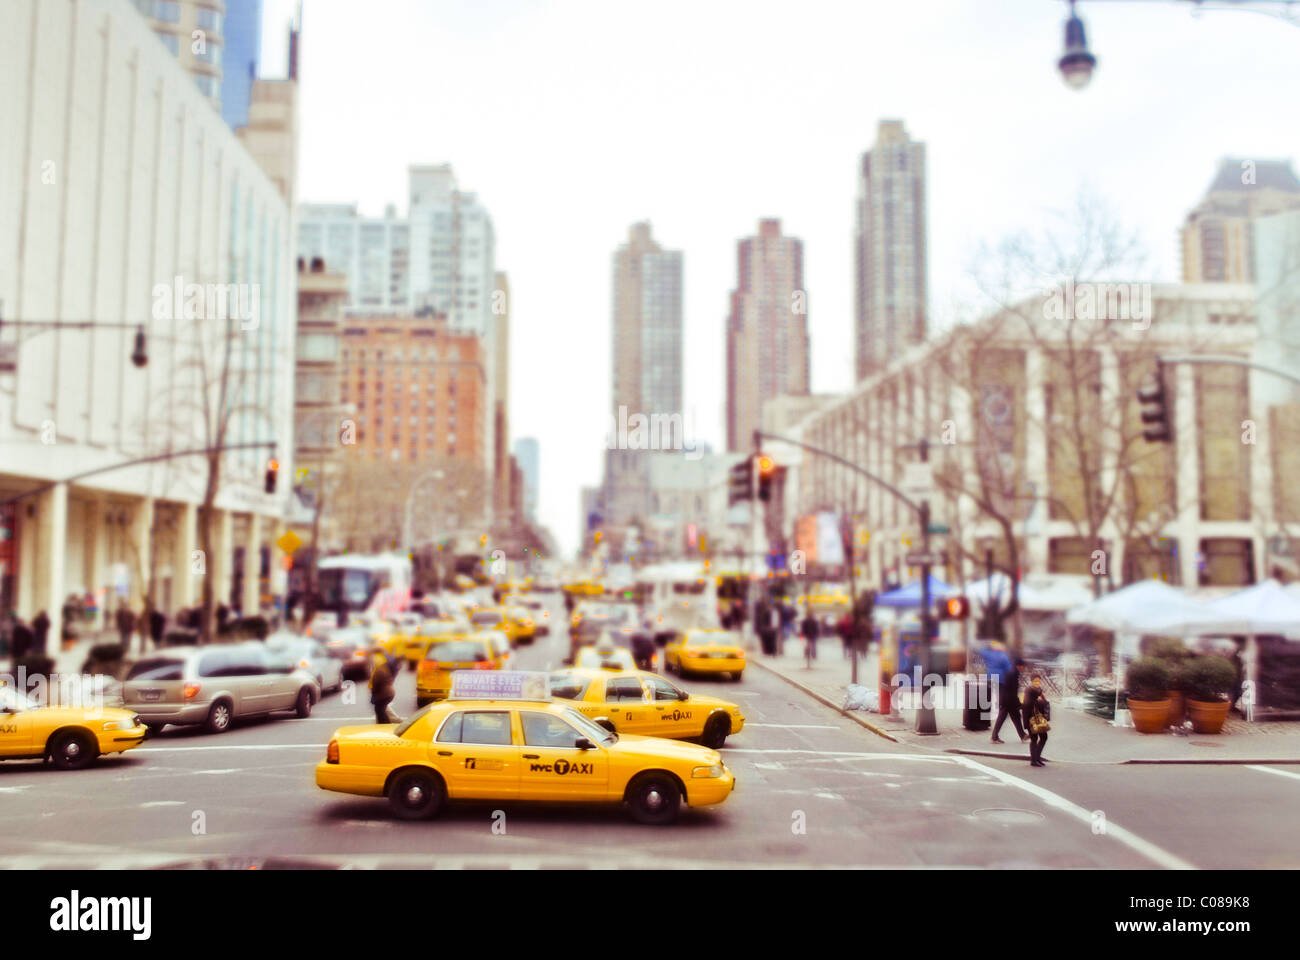 Yellow cab and New York streets. Stock Photo